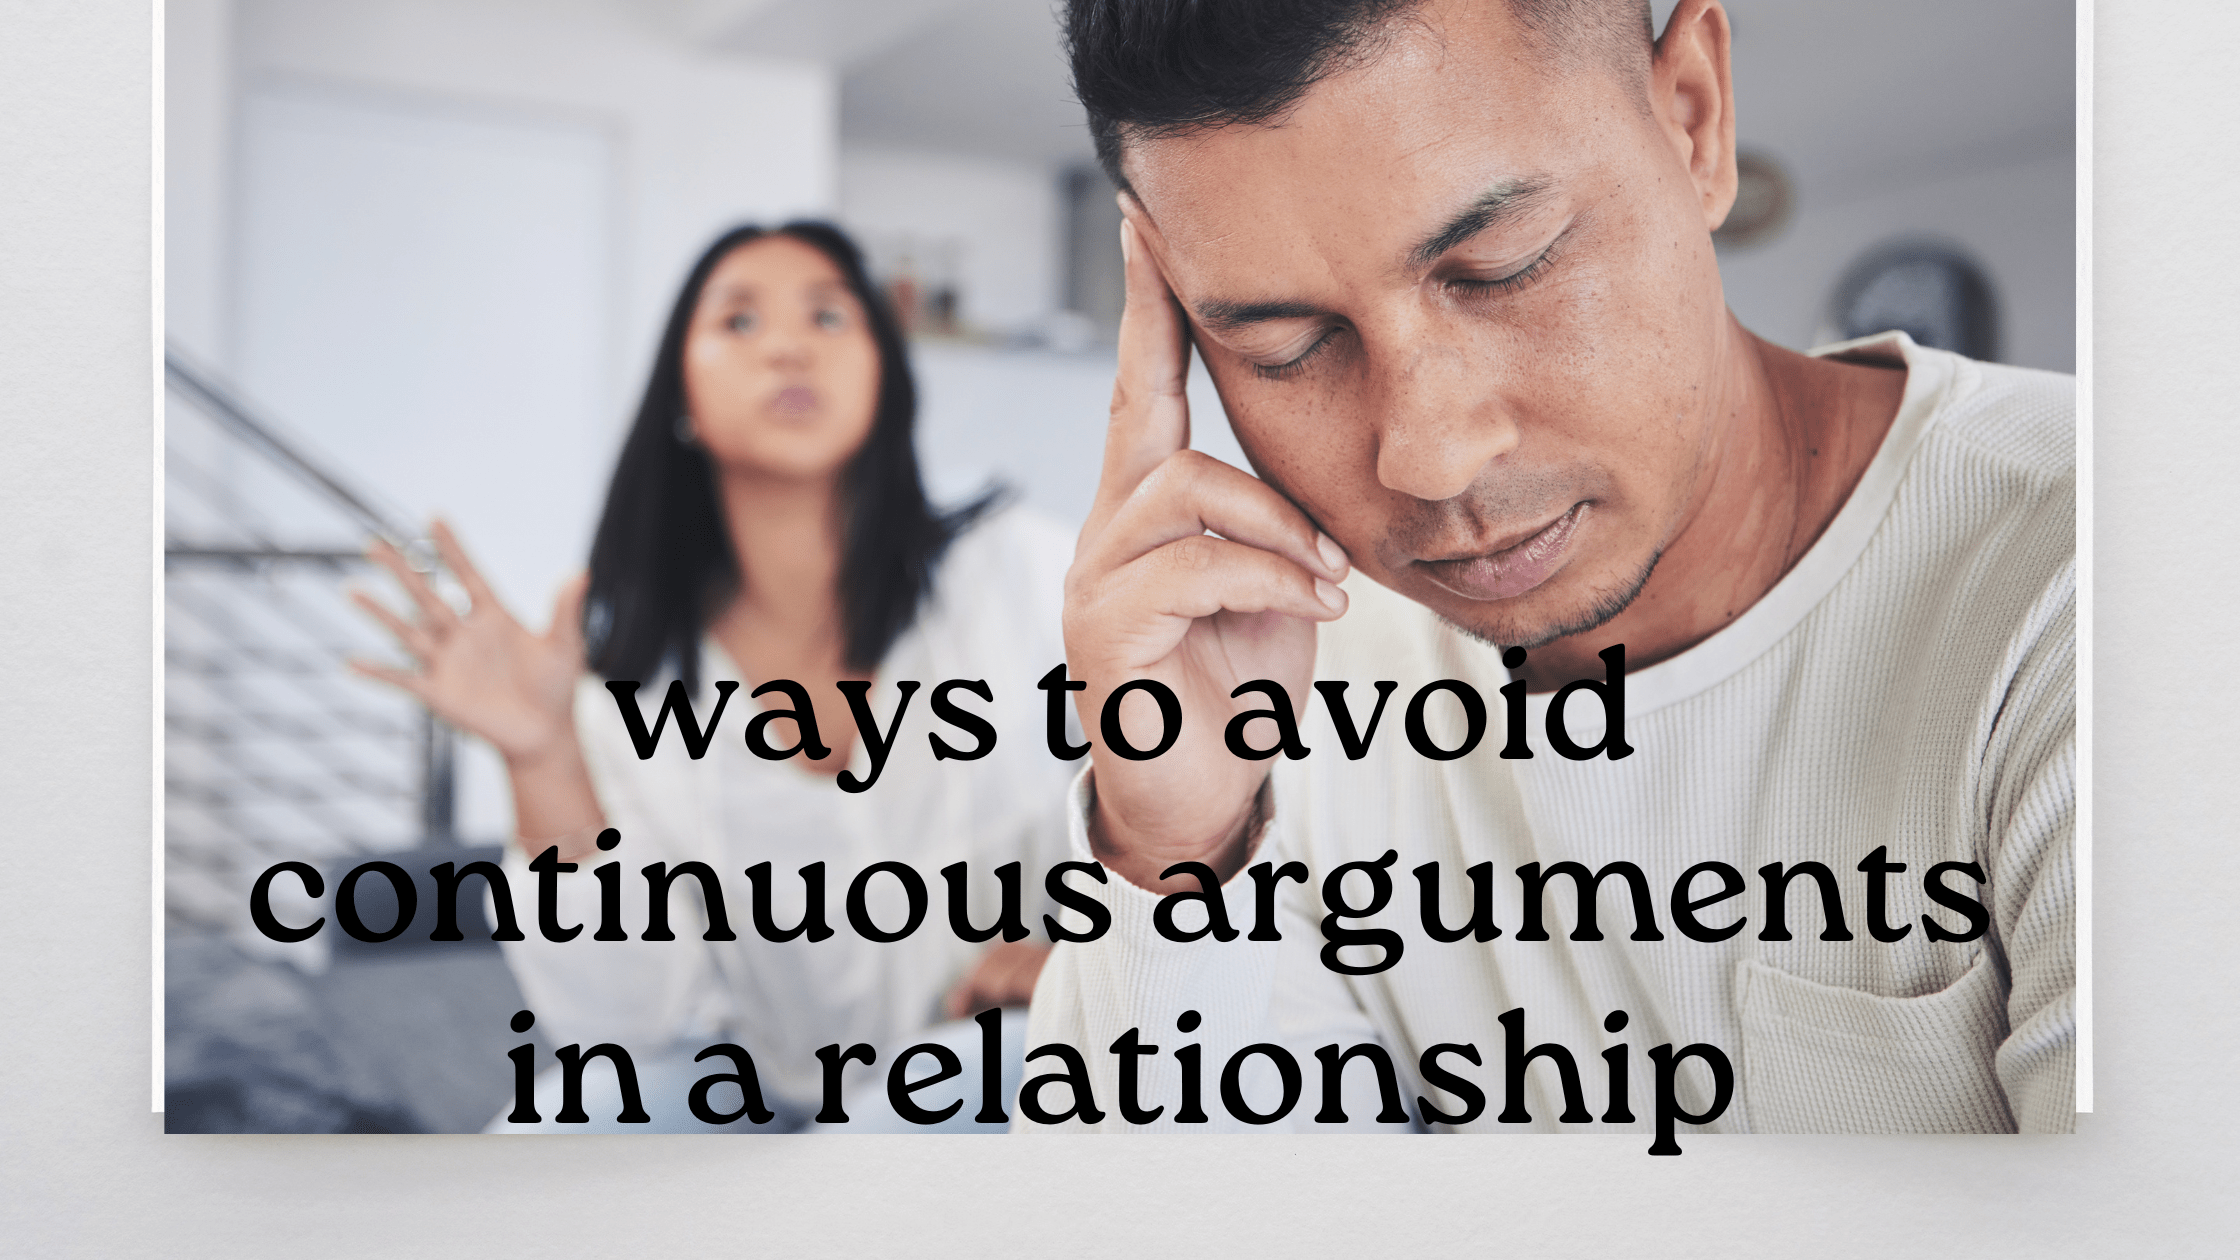 10 easy ways to avoid continuous arguments in a relationship 25